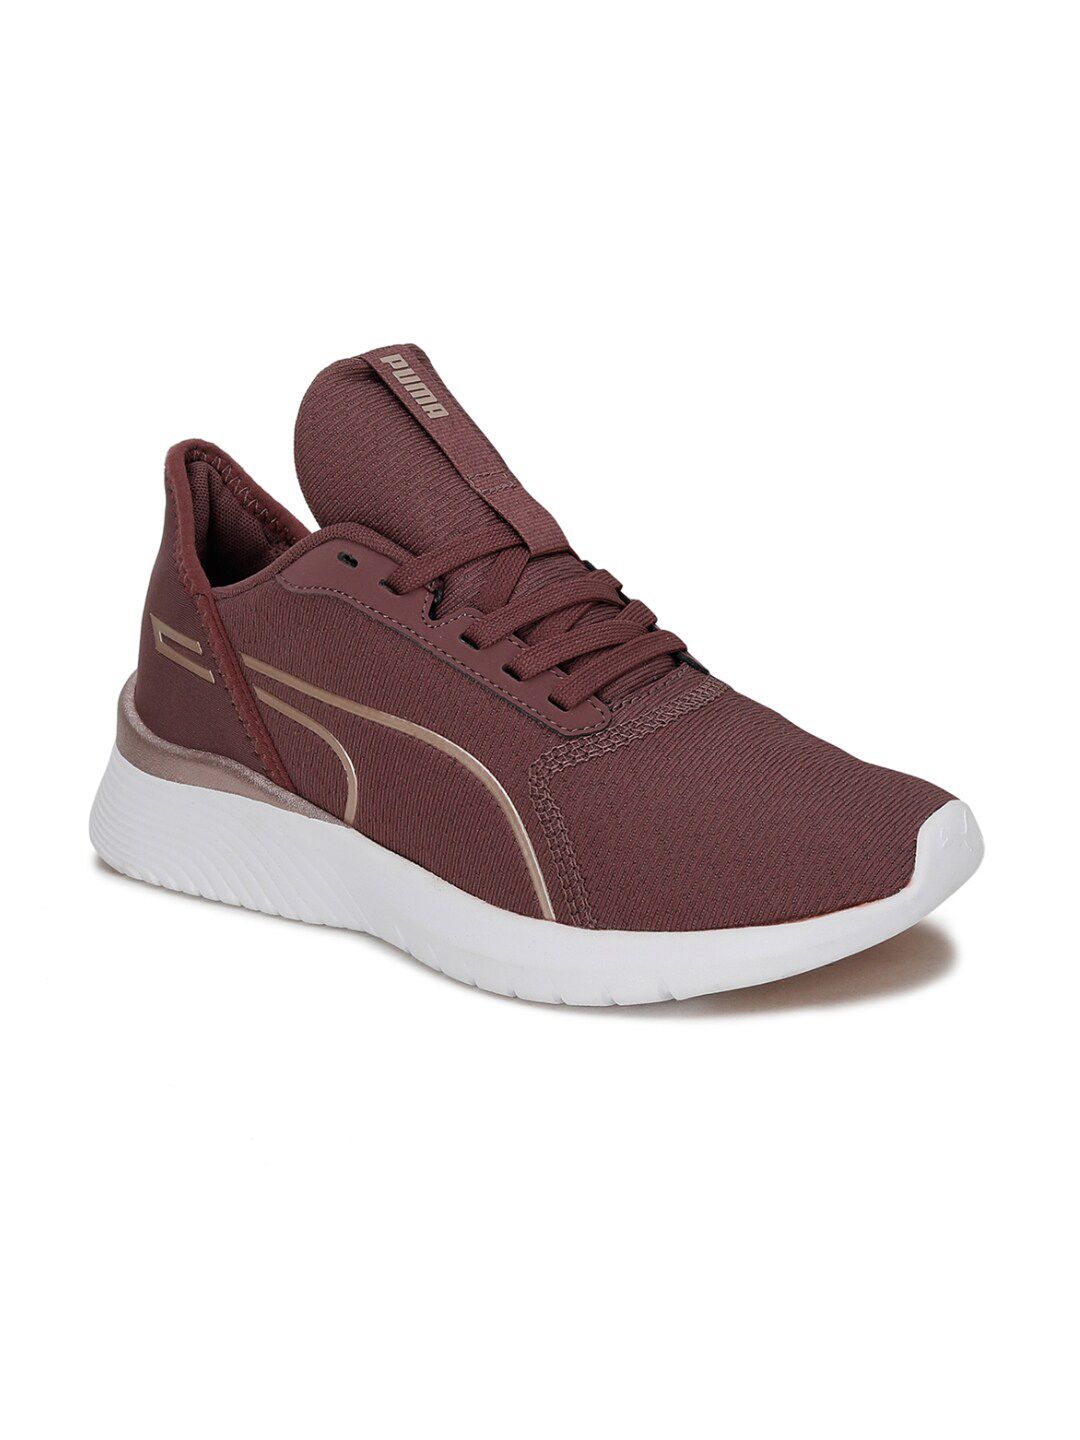 Puma Women Purple Textile Training or Gym Shoes Price in India